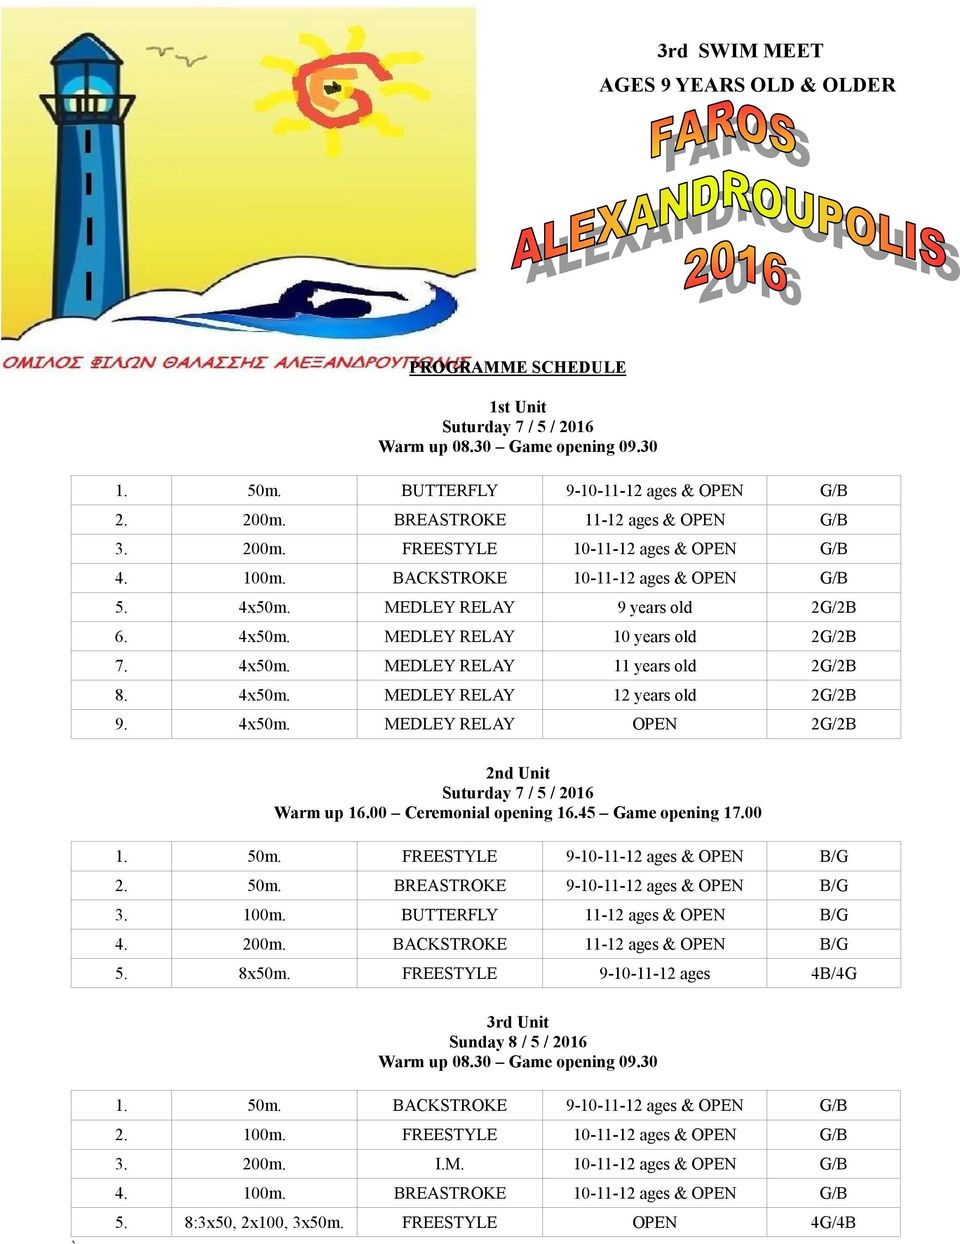 4x50m. MEDLEY RELAY 11 years old 2G/2B 8. 4x50m. MEDLEY RELAY 12 years old 2G/2B 9. 4x50m. MEDLEY RELAY OPEN 2G/2B 2nd Unit Suturday 7 / 5 / 2016 Warm up 16.00 Ceremonial opening 16.